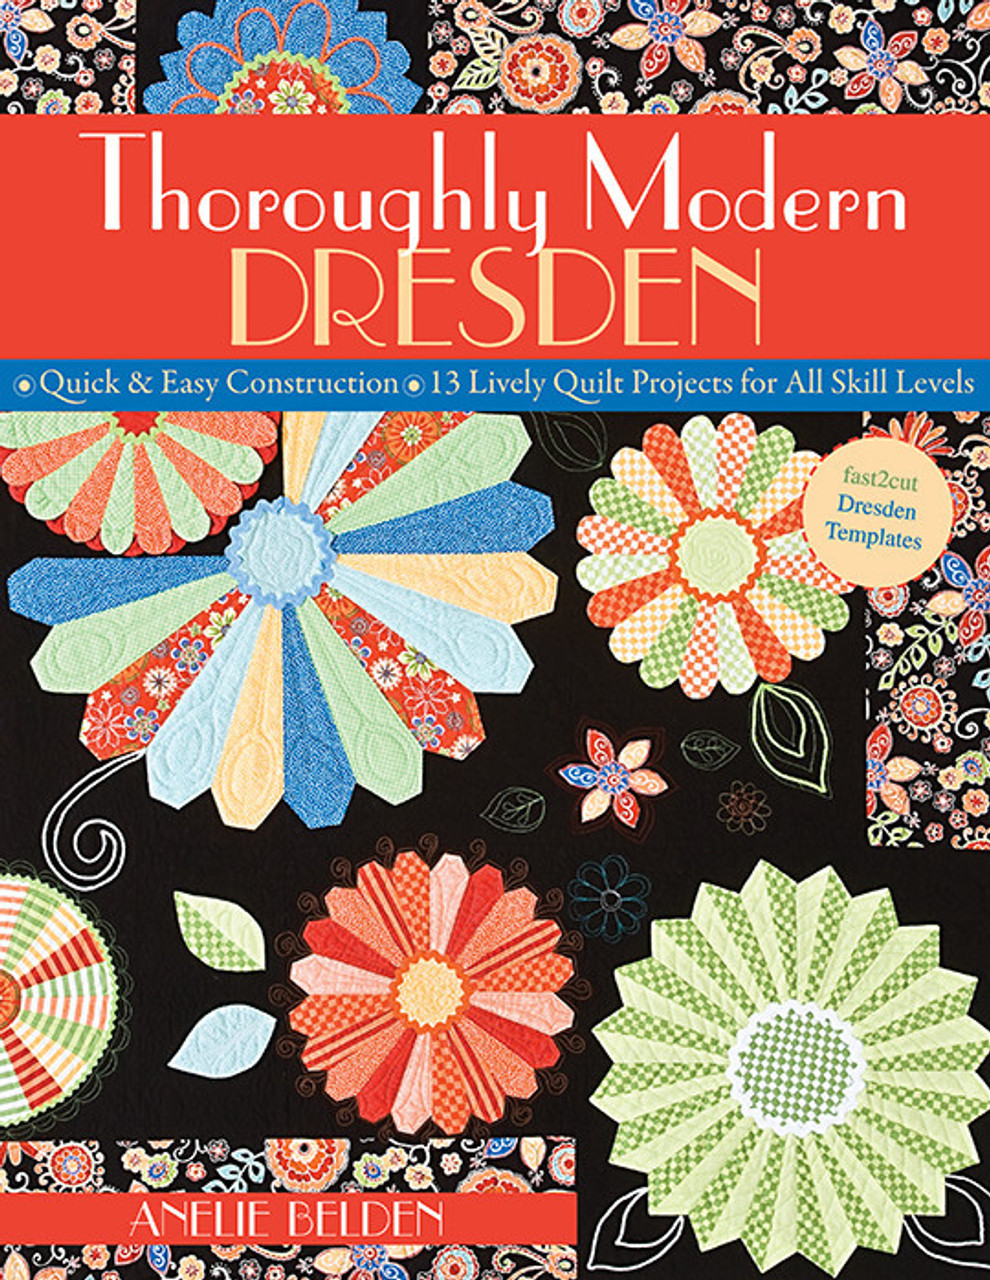 Thoroughly Modern Dresden: Quick and Easy Construction - 13 Lively Quilt Projects for All Skill Levels [Book]